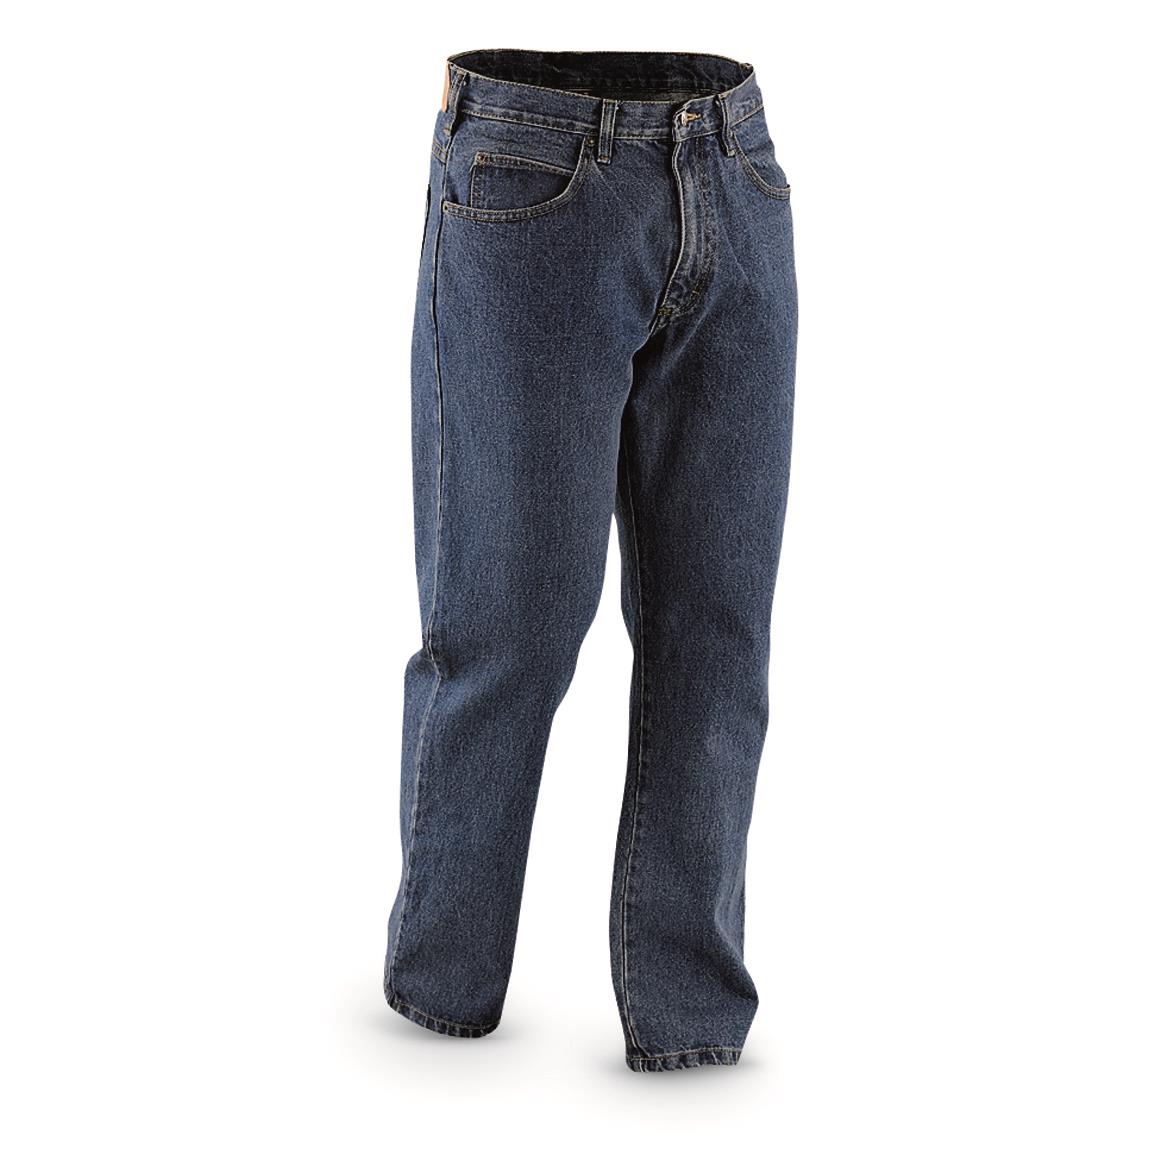 Guide Gear Men’s 5-Pocket Jeans, Relaxed Fit - 221532, Jeans & Pants at ...